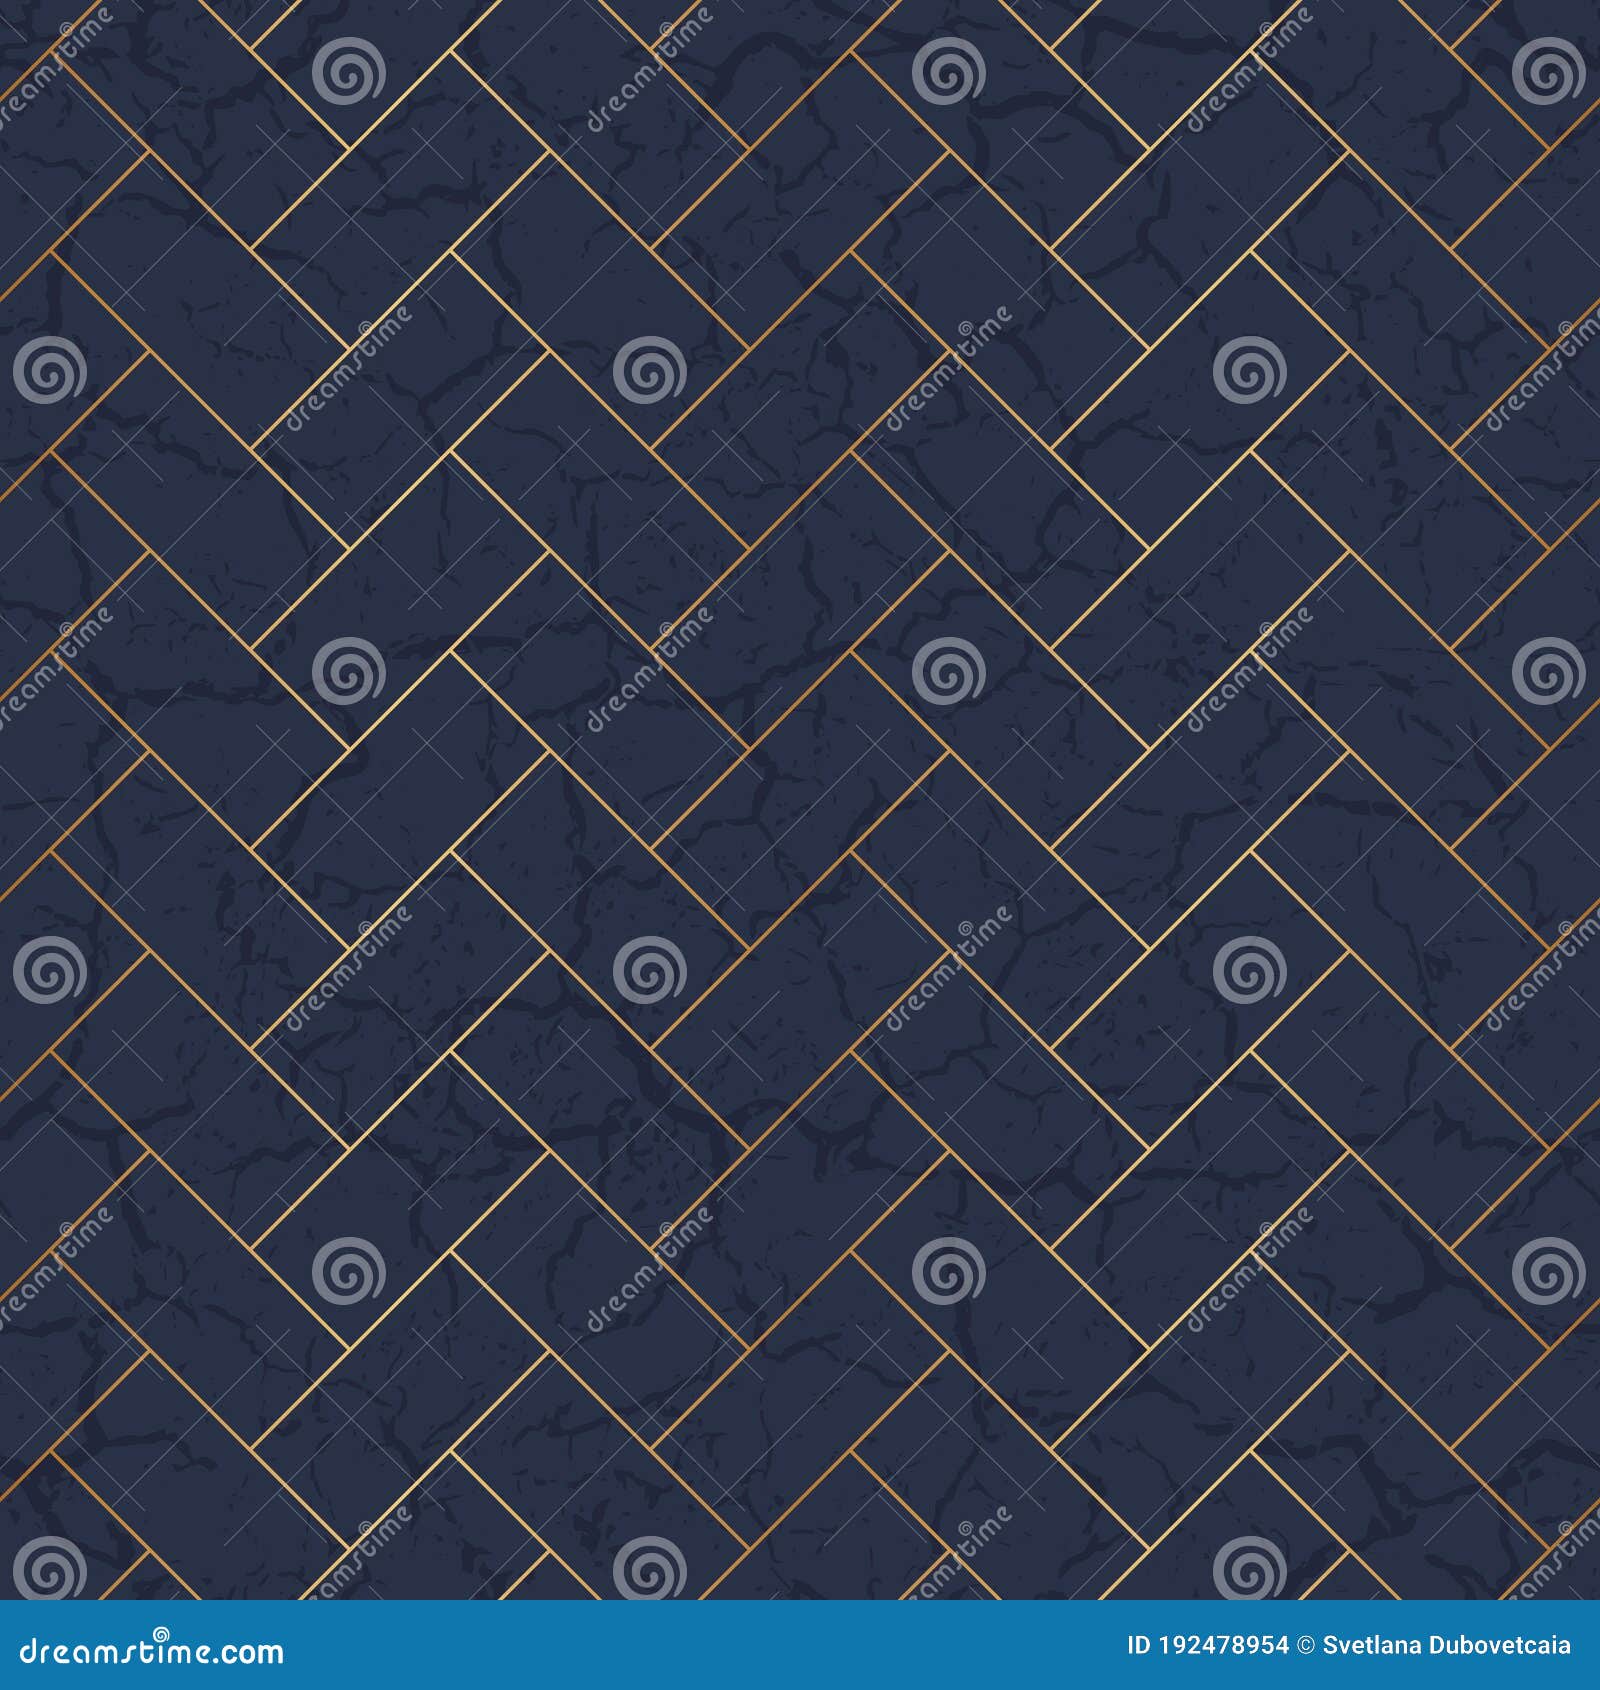  marble flooring parquet. floor tile. parquetry seamless pattern. abstract background zigzag grid. marbling surface tiles wi